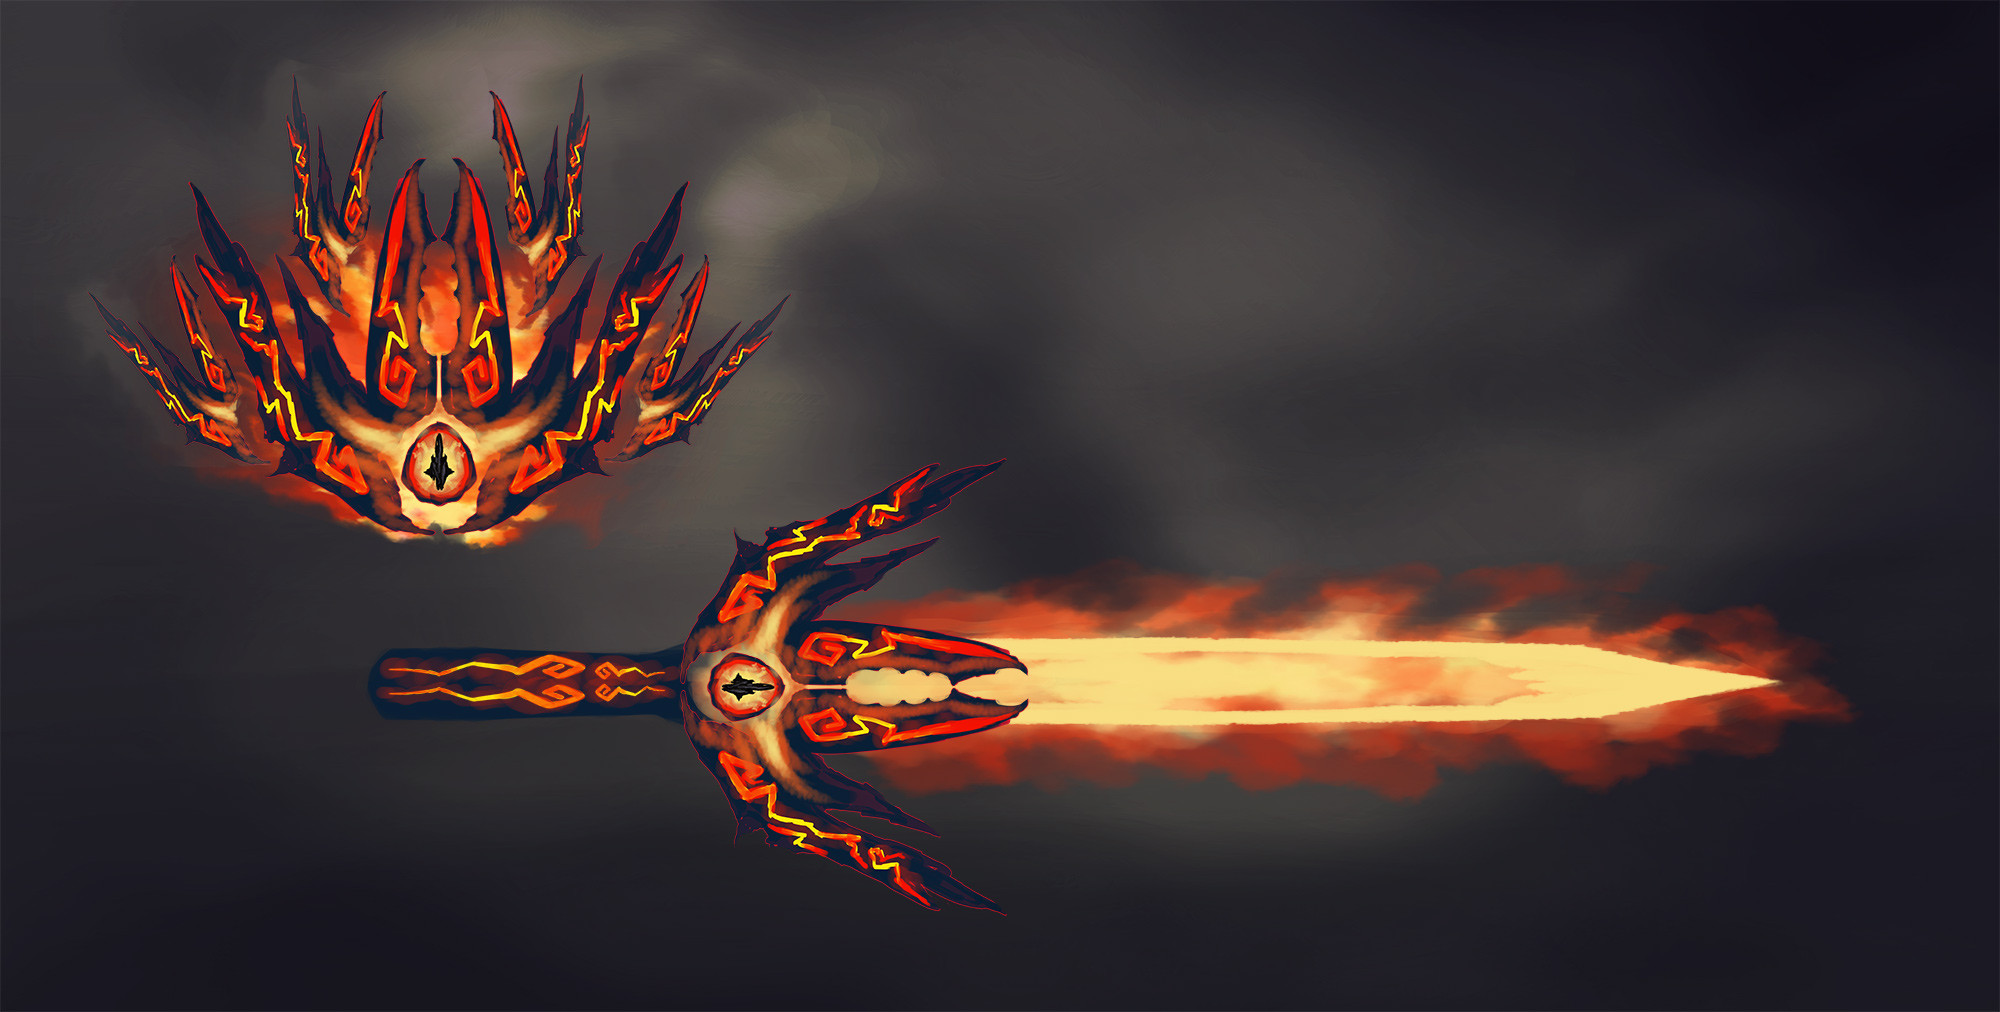 Initial sketch for the fire great shield / sword